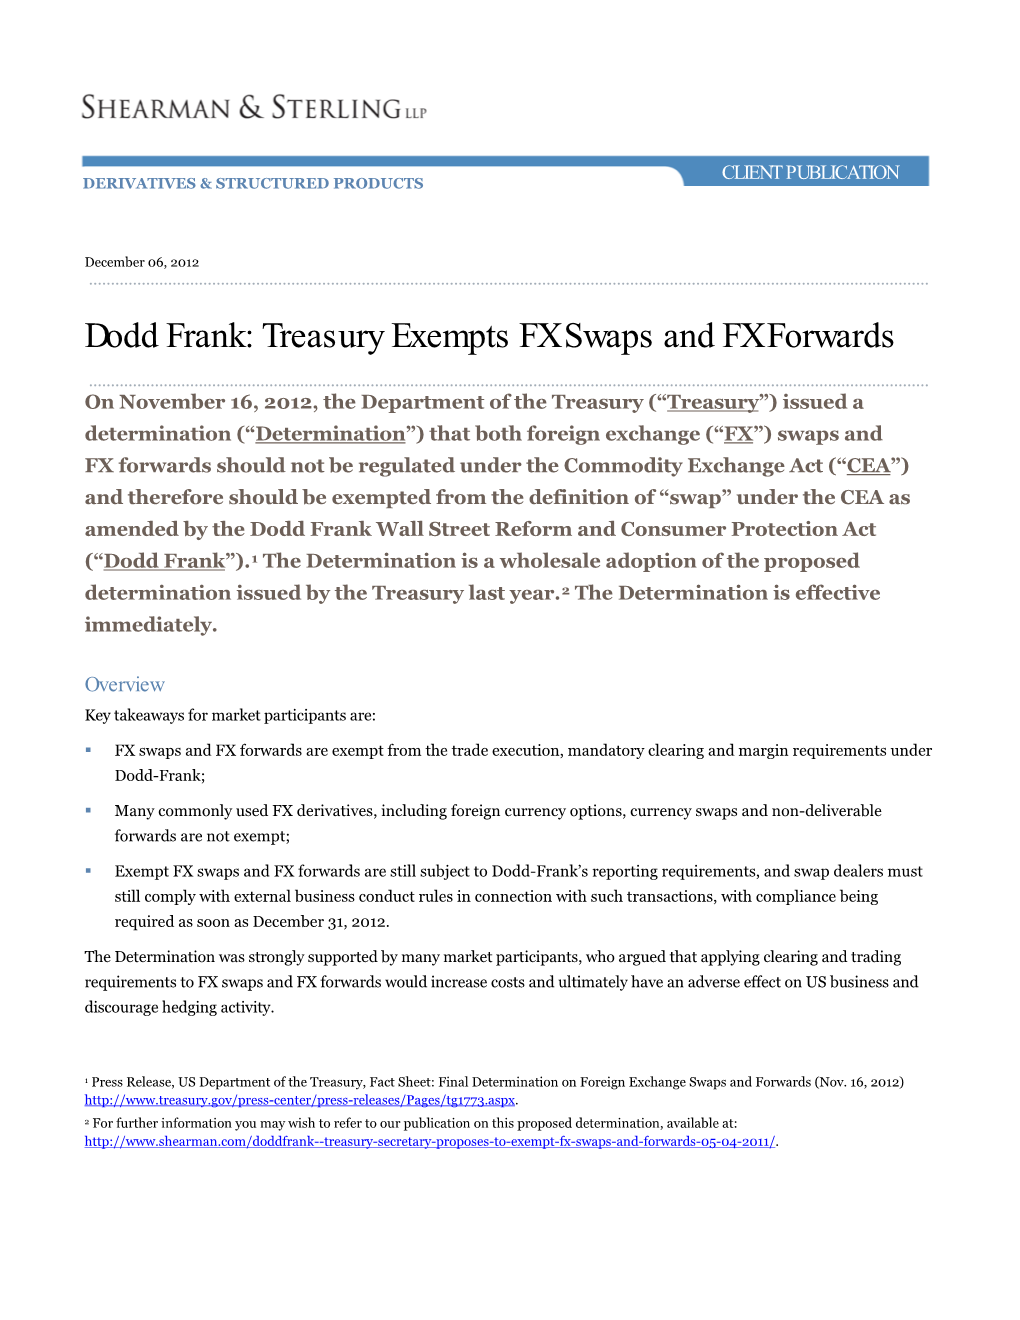 Dodd Frank: Treasury Exempts FX Swaps and FX Forwards